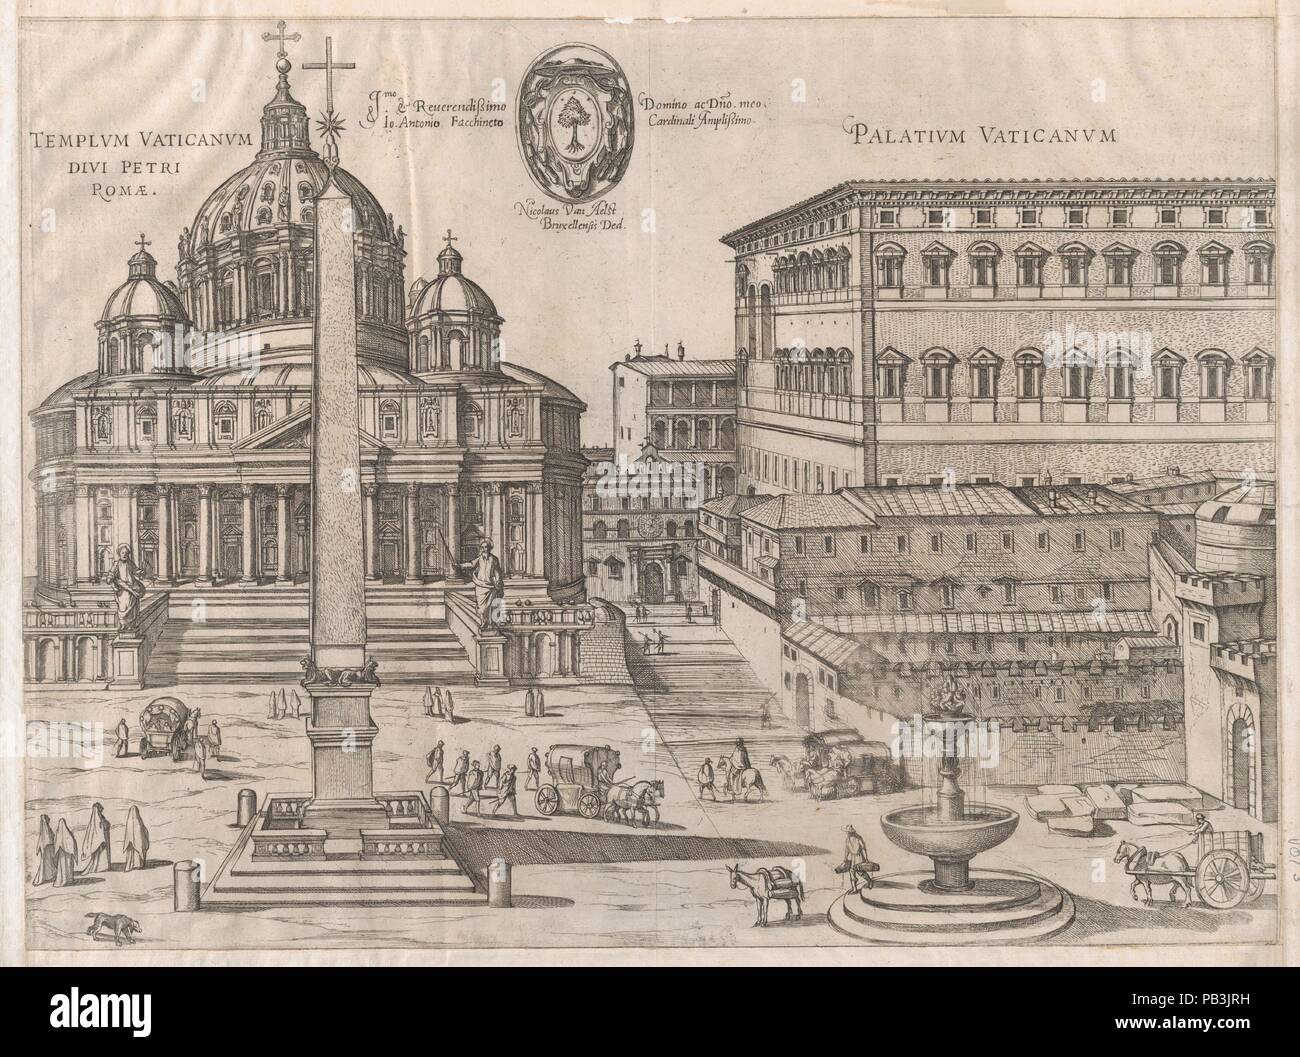 Speculum Romanae Magnificentiae: St. Peter's. Artist: Anonymous. Dimensions: sheet: 17 7/8 x 22 1/16 in. (45.4 x 56 cm)  plate: 15 1/2 x 20 7/8 in. (39.4 x 53 cm). Publisher: Nicolaus van Aelst (Flemish, Brussels 1526-1613 Rome). Series/Portfolio: Speculum Romanae Magnificentiae. Date: 16th century.  This print comes from the museum's copy of the Speculum Romanae Magnificentiae (The Mirror of Roman Magnificence) The Speculum found its origin in the publishing endeavors of Antonio Salamanca and Antonio Lafreri. During their Roman publishing careers, the two foreign publishers - who worked toget Stock Photo